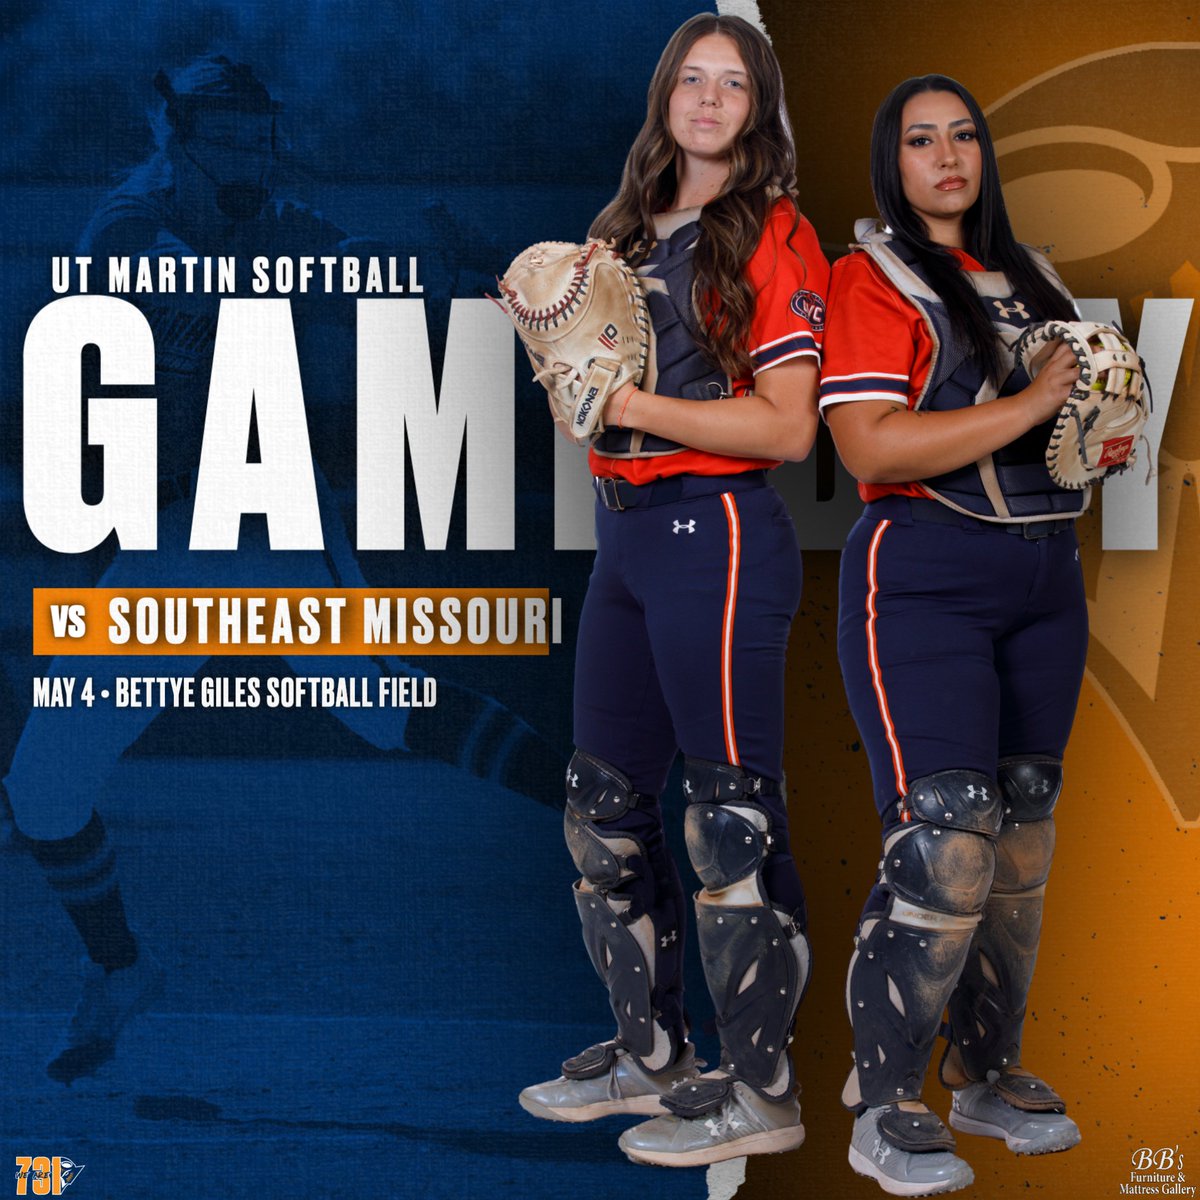 Graduation ☑️ Doubleheader ⏳ @UTMSoftball opens a three-game series against Southeast Missouri with a doubleheader beginning at 2 p.m. Live Stats Game 1: statb.us/b/514488 Game 2: statb.us/b/514495 #MartinMade | #OVCit